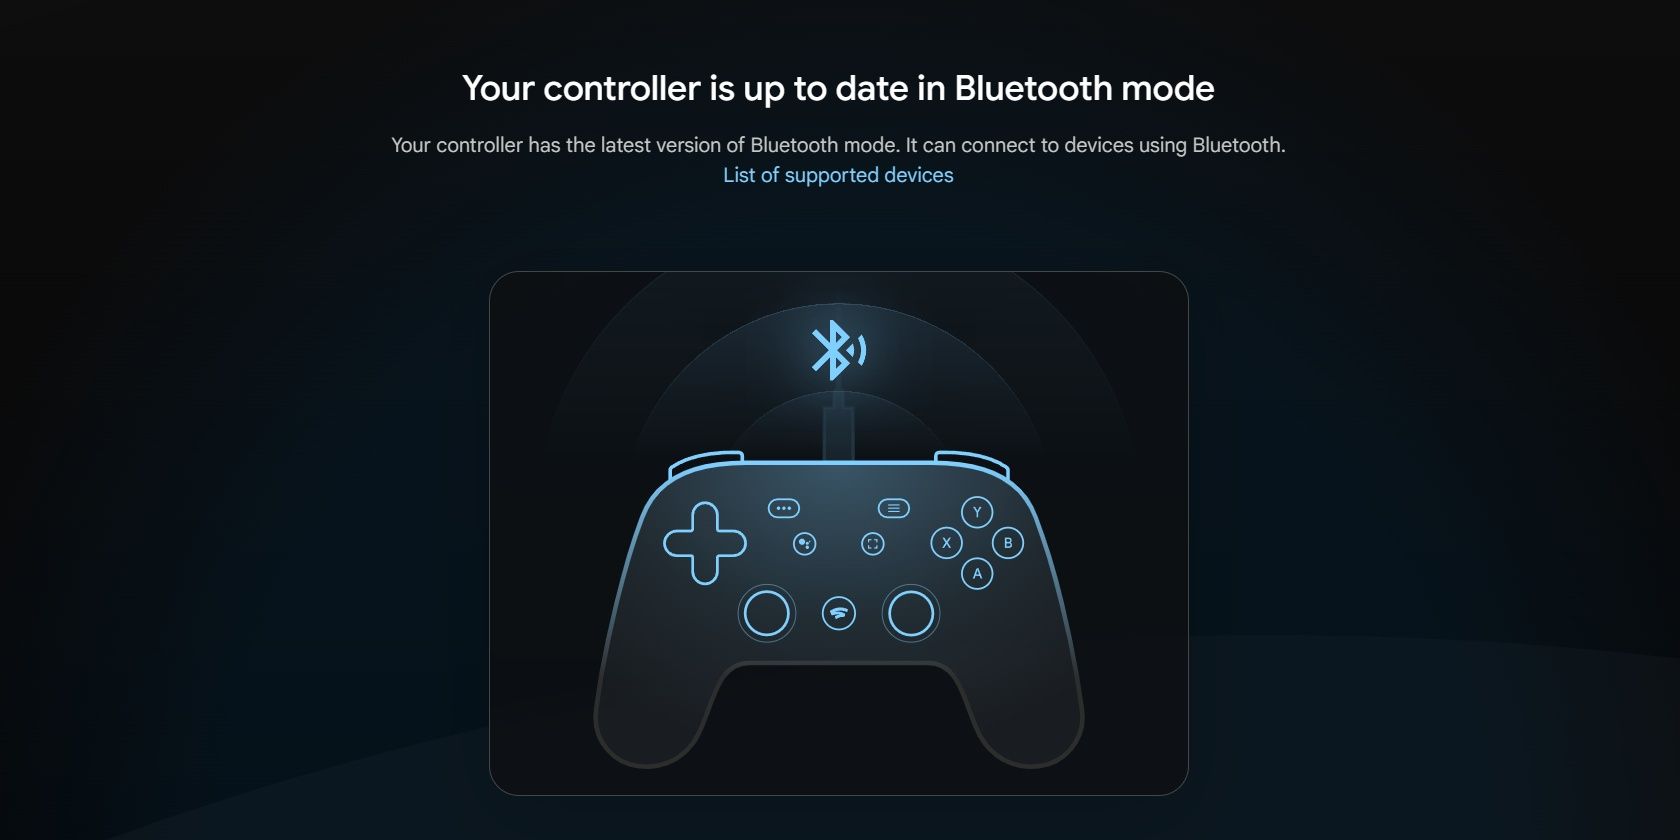 Update Google Stadia controller to Bluetooth mode